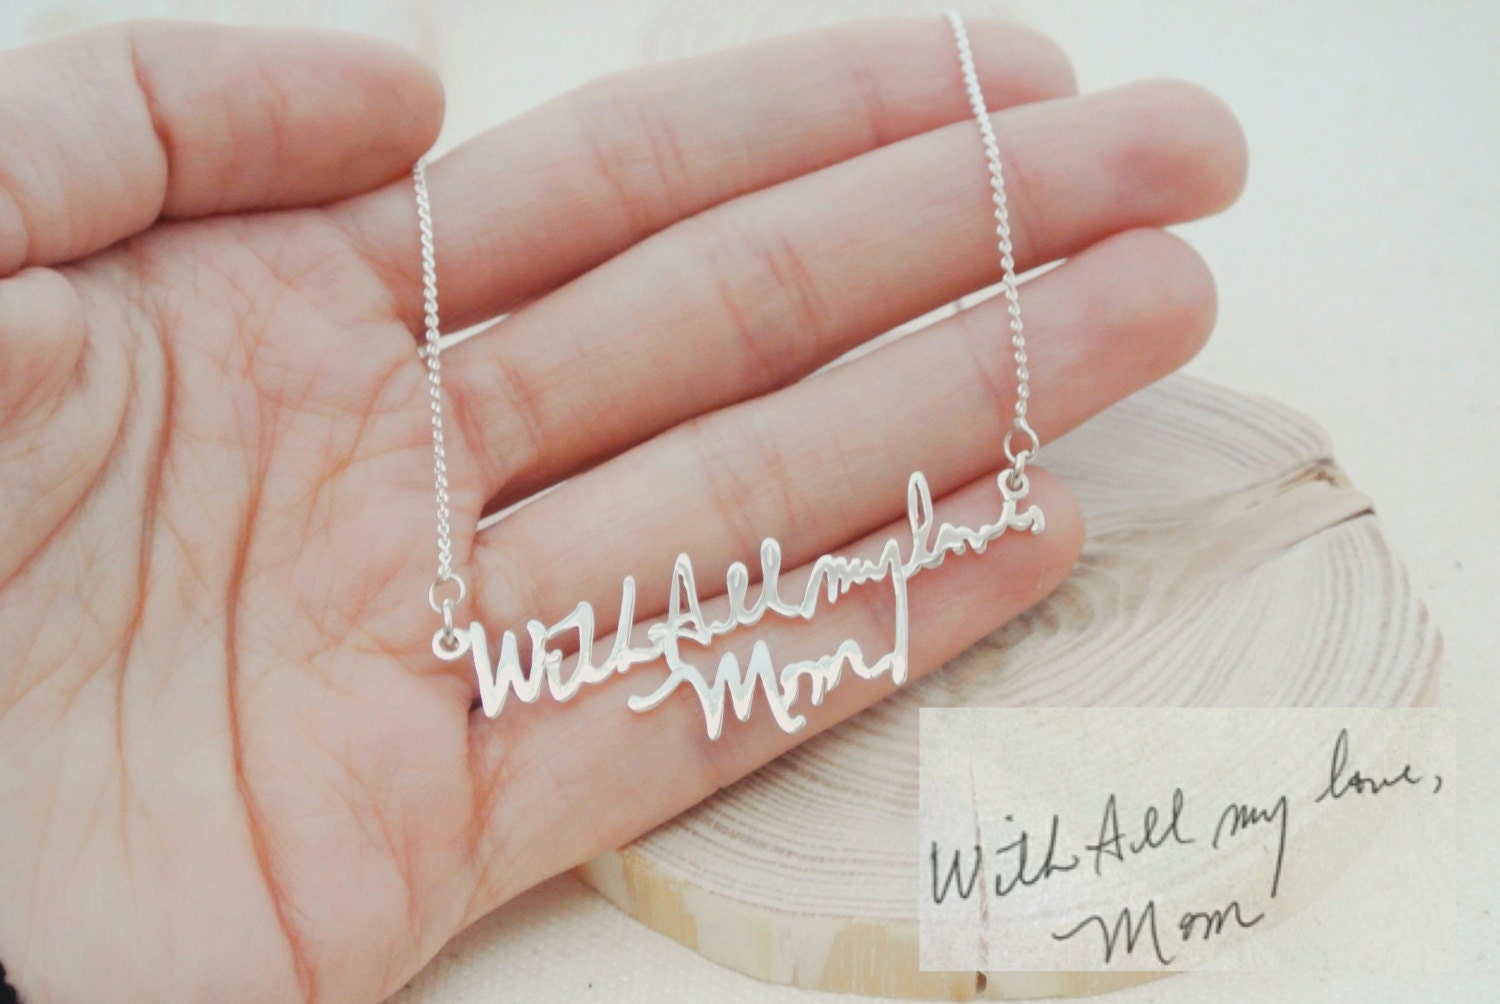 Memorial Signature Necklace Personalized Handwriting Keepsake Jewelry in Sterling Silver Nh01